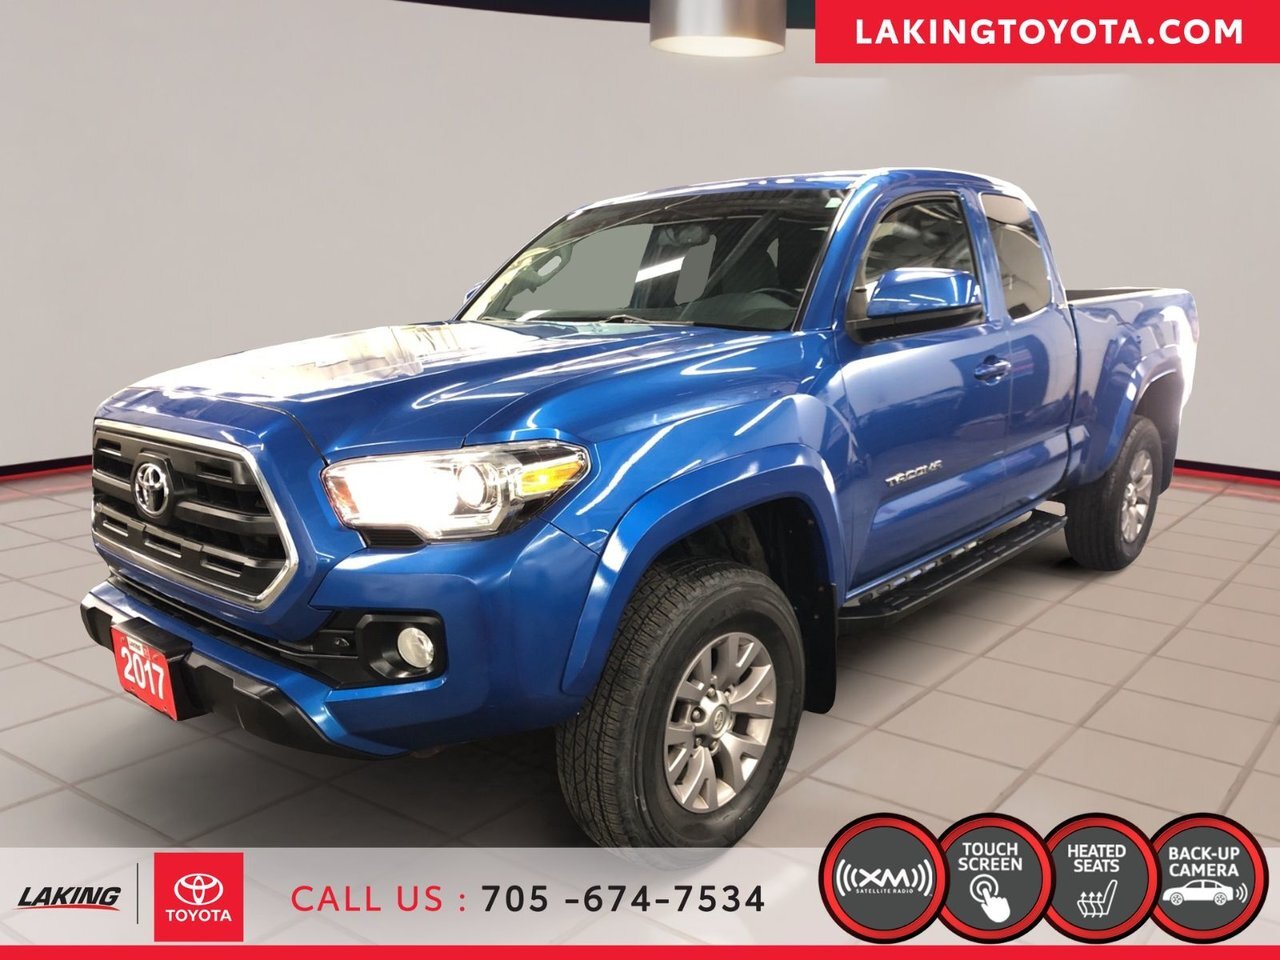 2017 Toyota Tacoma SR5 4X4 Access Cab Looking for a compact truck to 